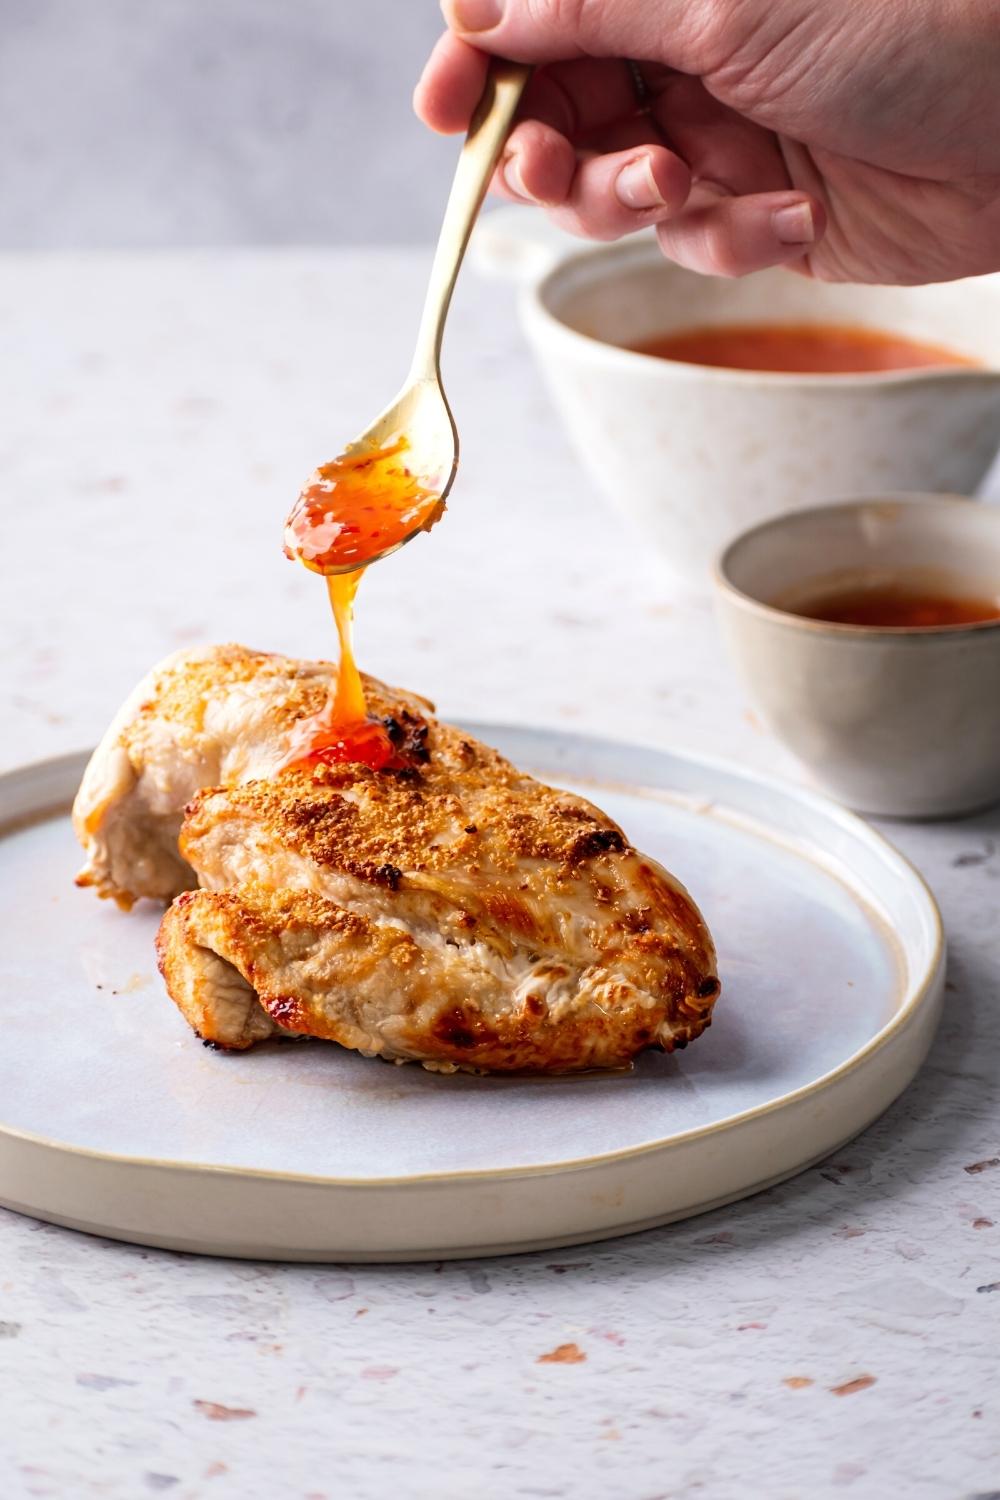 A hand drizzling sweet chili sauce on a piece of chicken breast on a white plate.